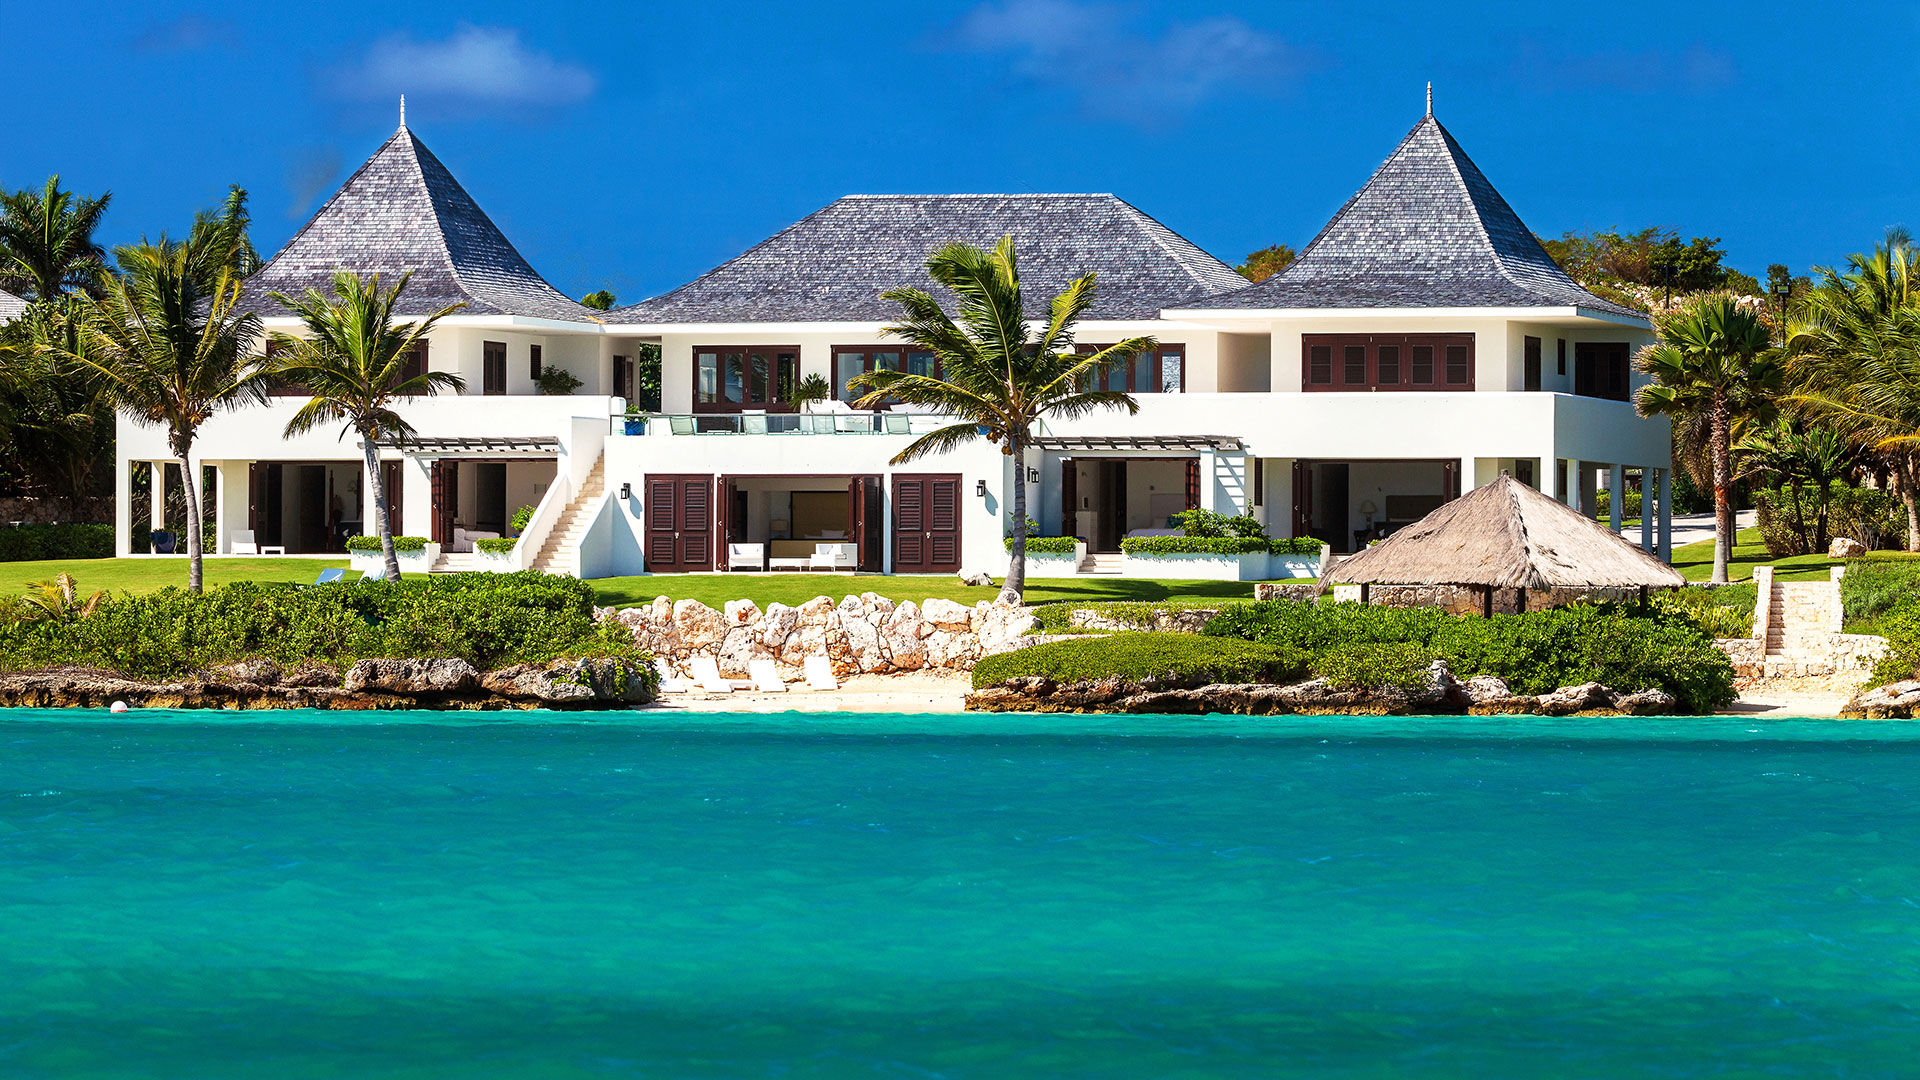 Le Bleu Villa on Anguilla features ten master suites and sits upon a stunning tropical landscape making it a premiere rental villa on the island.
